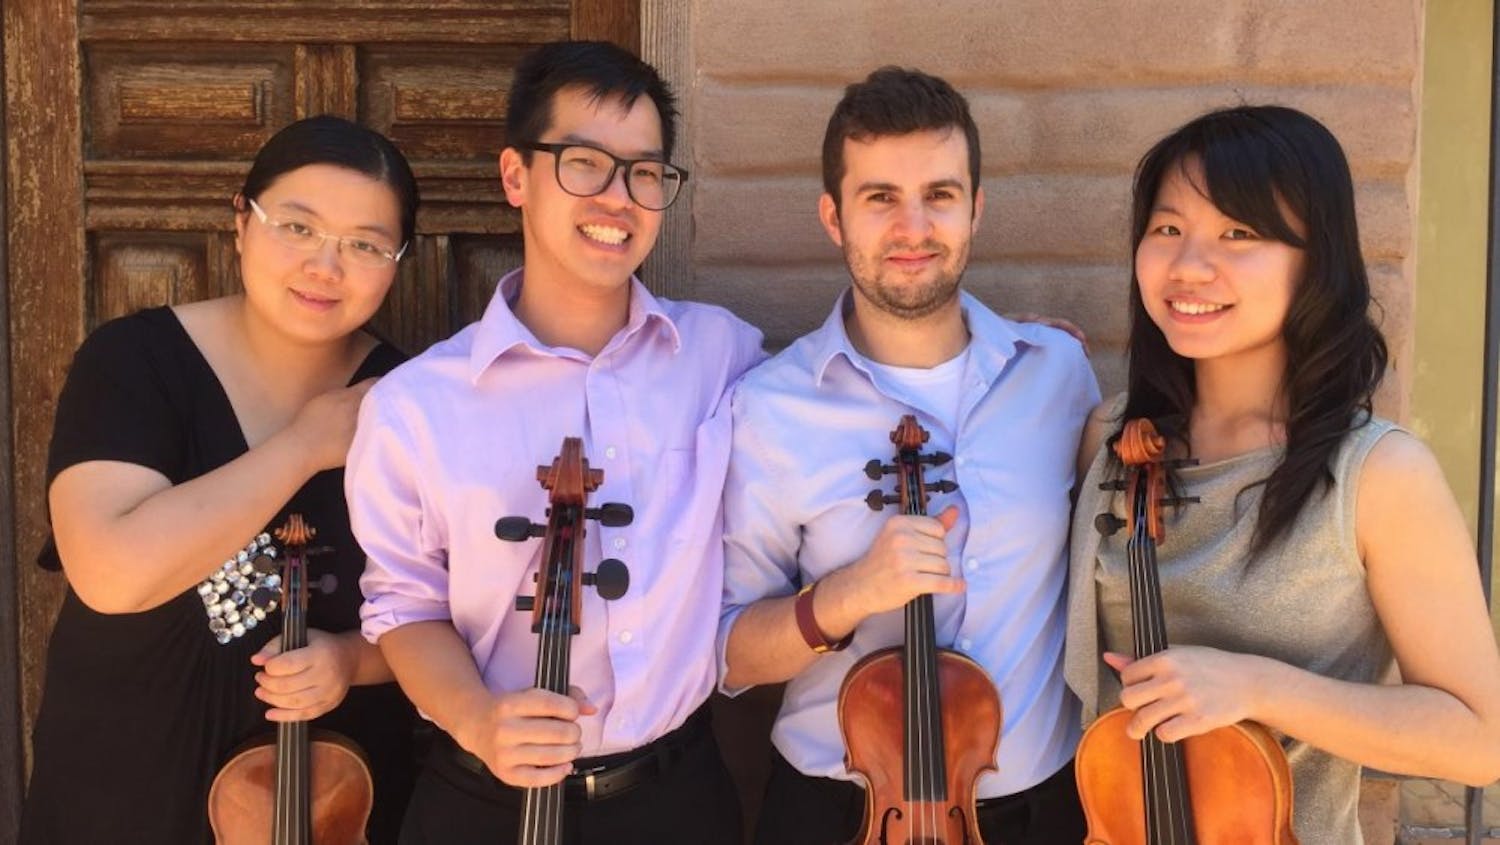 Graduate students Aihua Zhang, Yeil Park, Vladmir Gebe&nbsp;and Yang-Fen Chen of The Herberger Quarter pose for a photo before their recital at the ASU Kerr Cultural Center in May, 2016. The group will be performing on Wednesday, Nov. 30, in the Recital Hall on the Tempe campus.